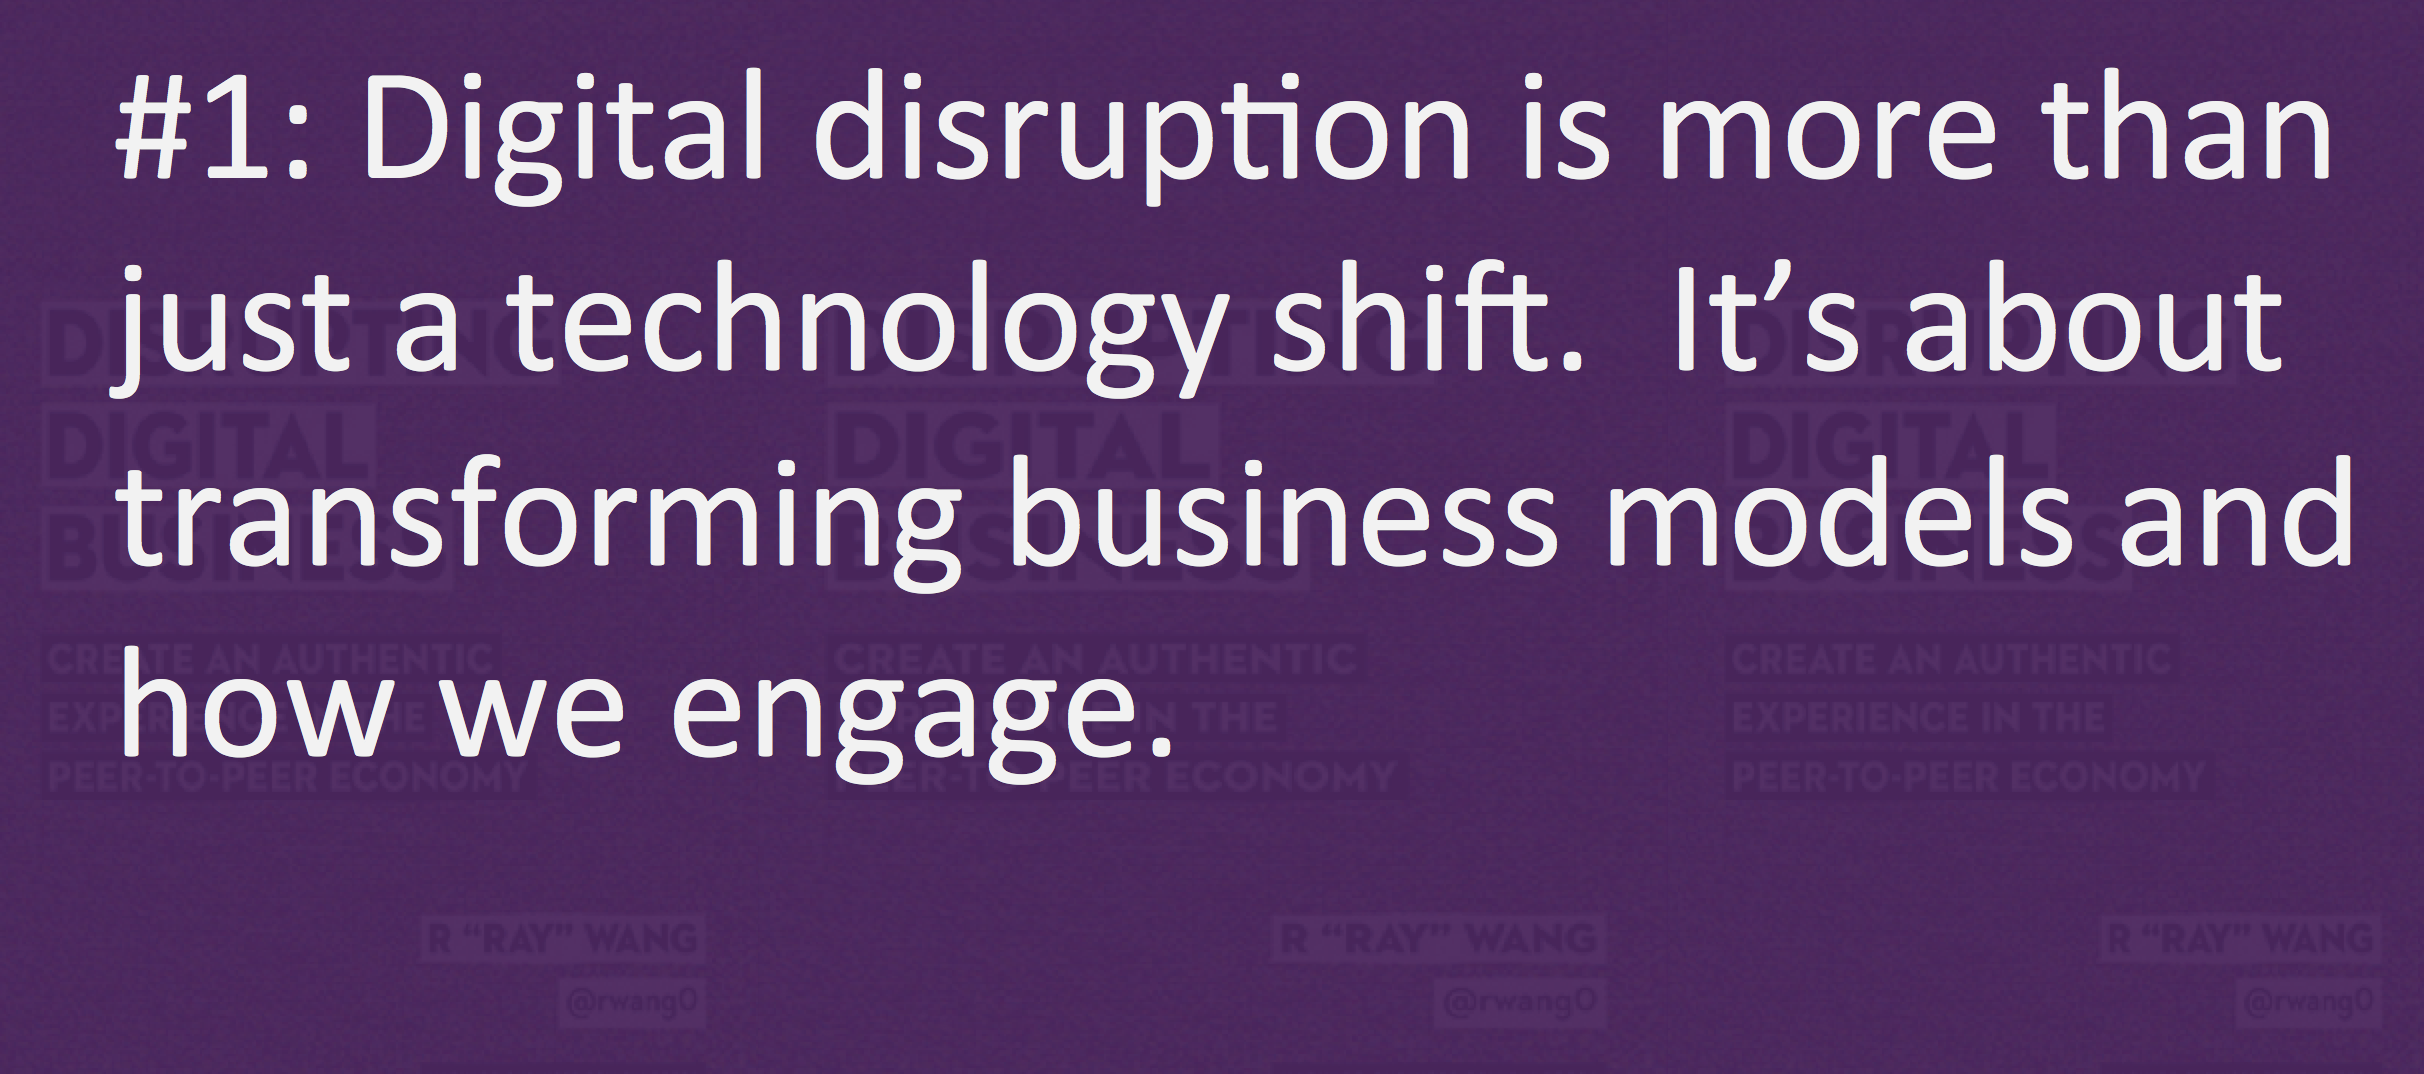 Lesson 1 From Disrupting Digital Business